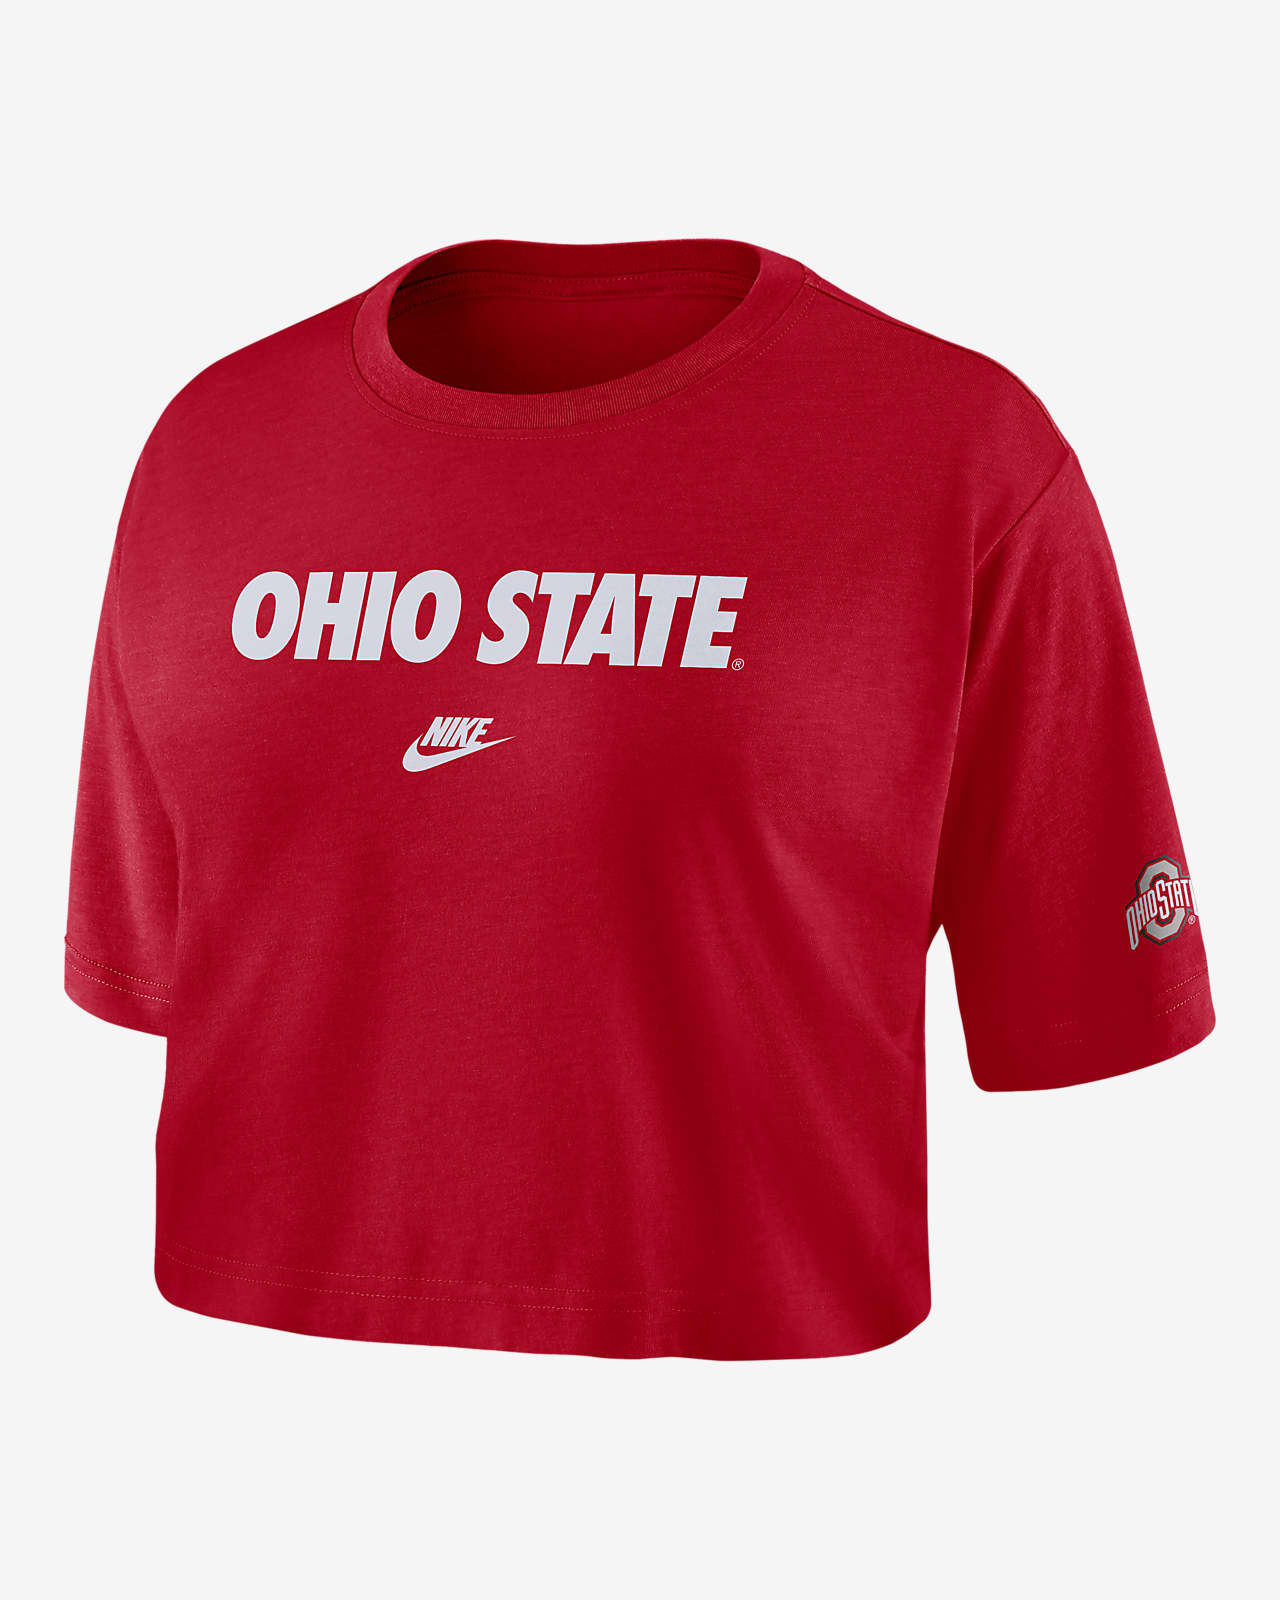 https://static.nike.com/a/images/t_PDP_1280_v1/f_auto,q_auto:eco/7408b0de-9024-47e8-88b0-e4e4bba06c03/ohio-state-legacy-womenscropped-crew-neck-t-shirt-ScPZN1.png